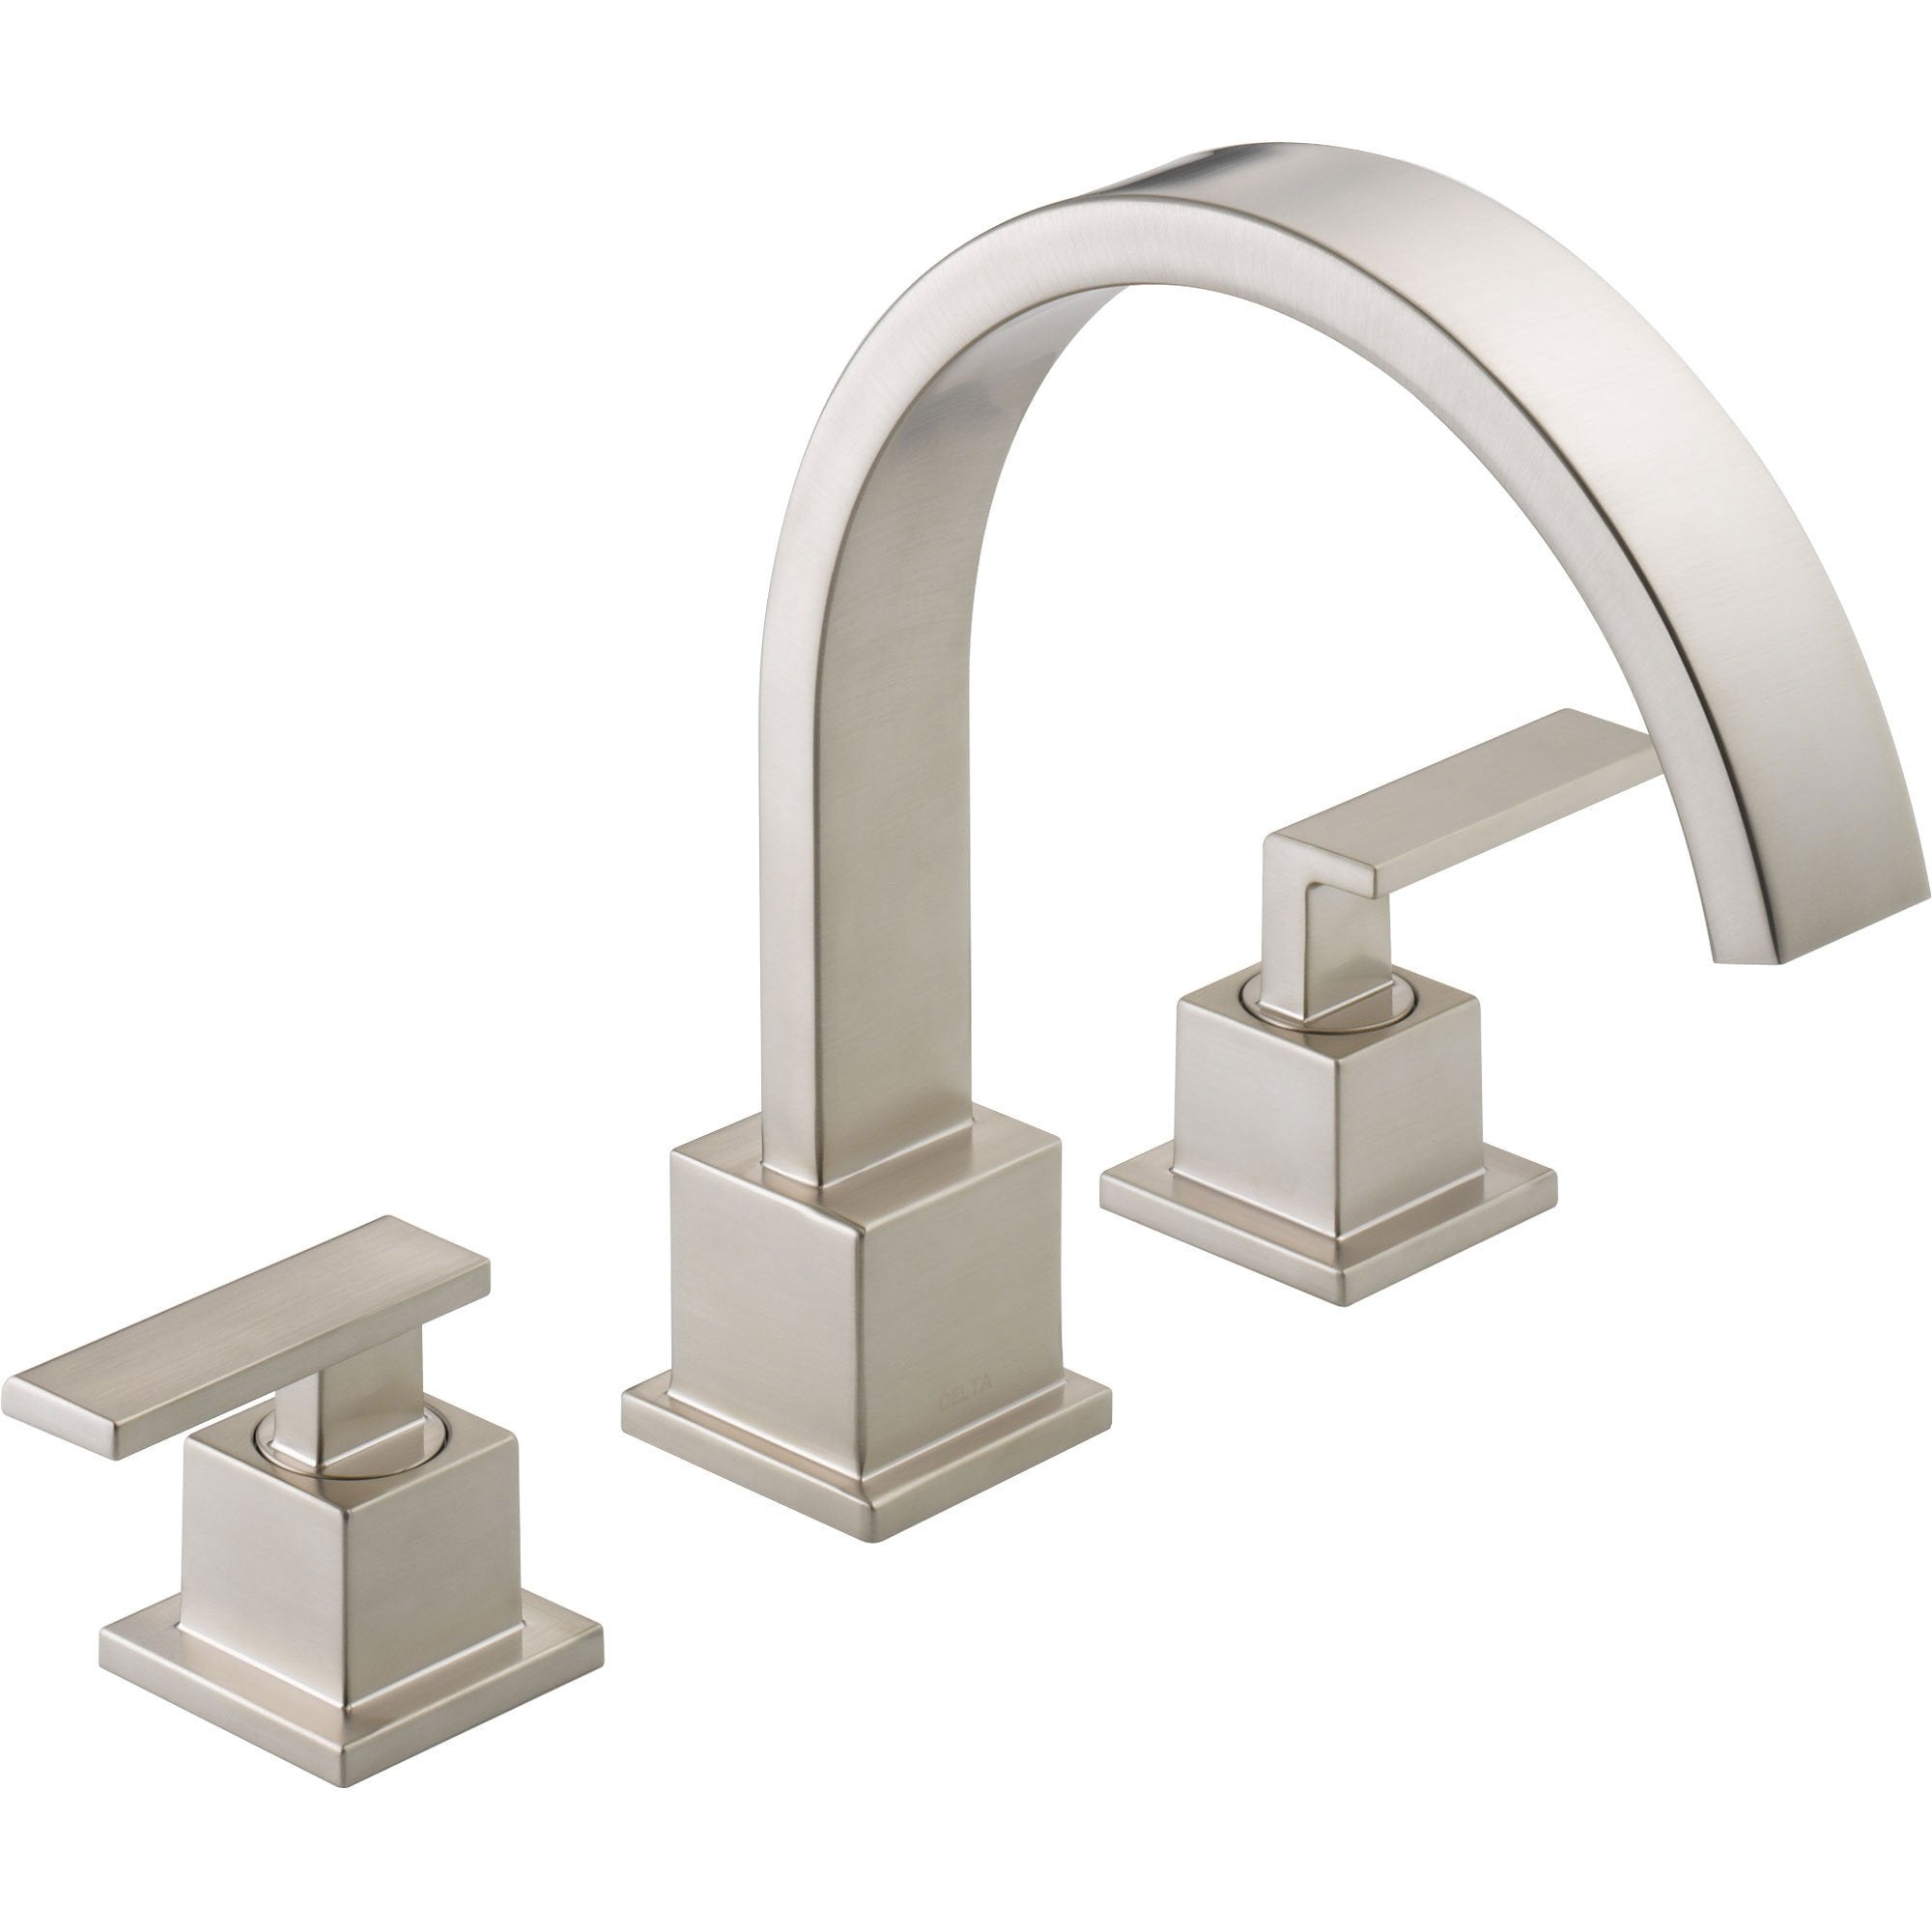 Delta Vero Modern Stainless Steel Finish Roman Tub Faucet with Valve D907V